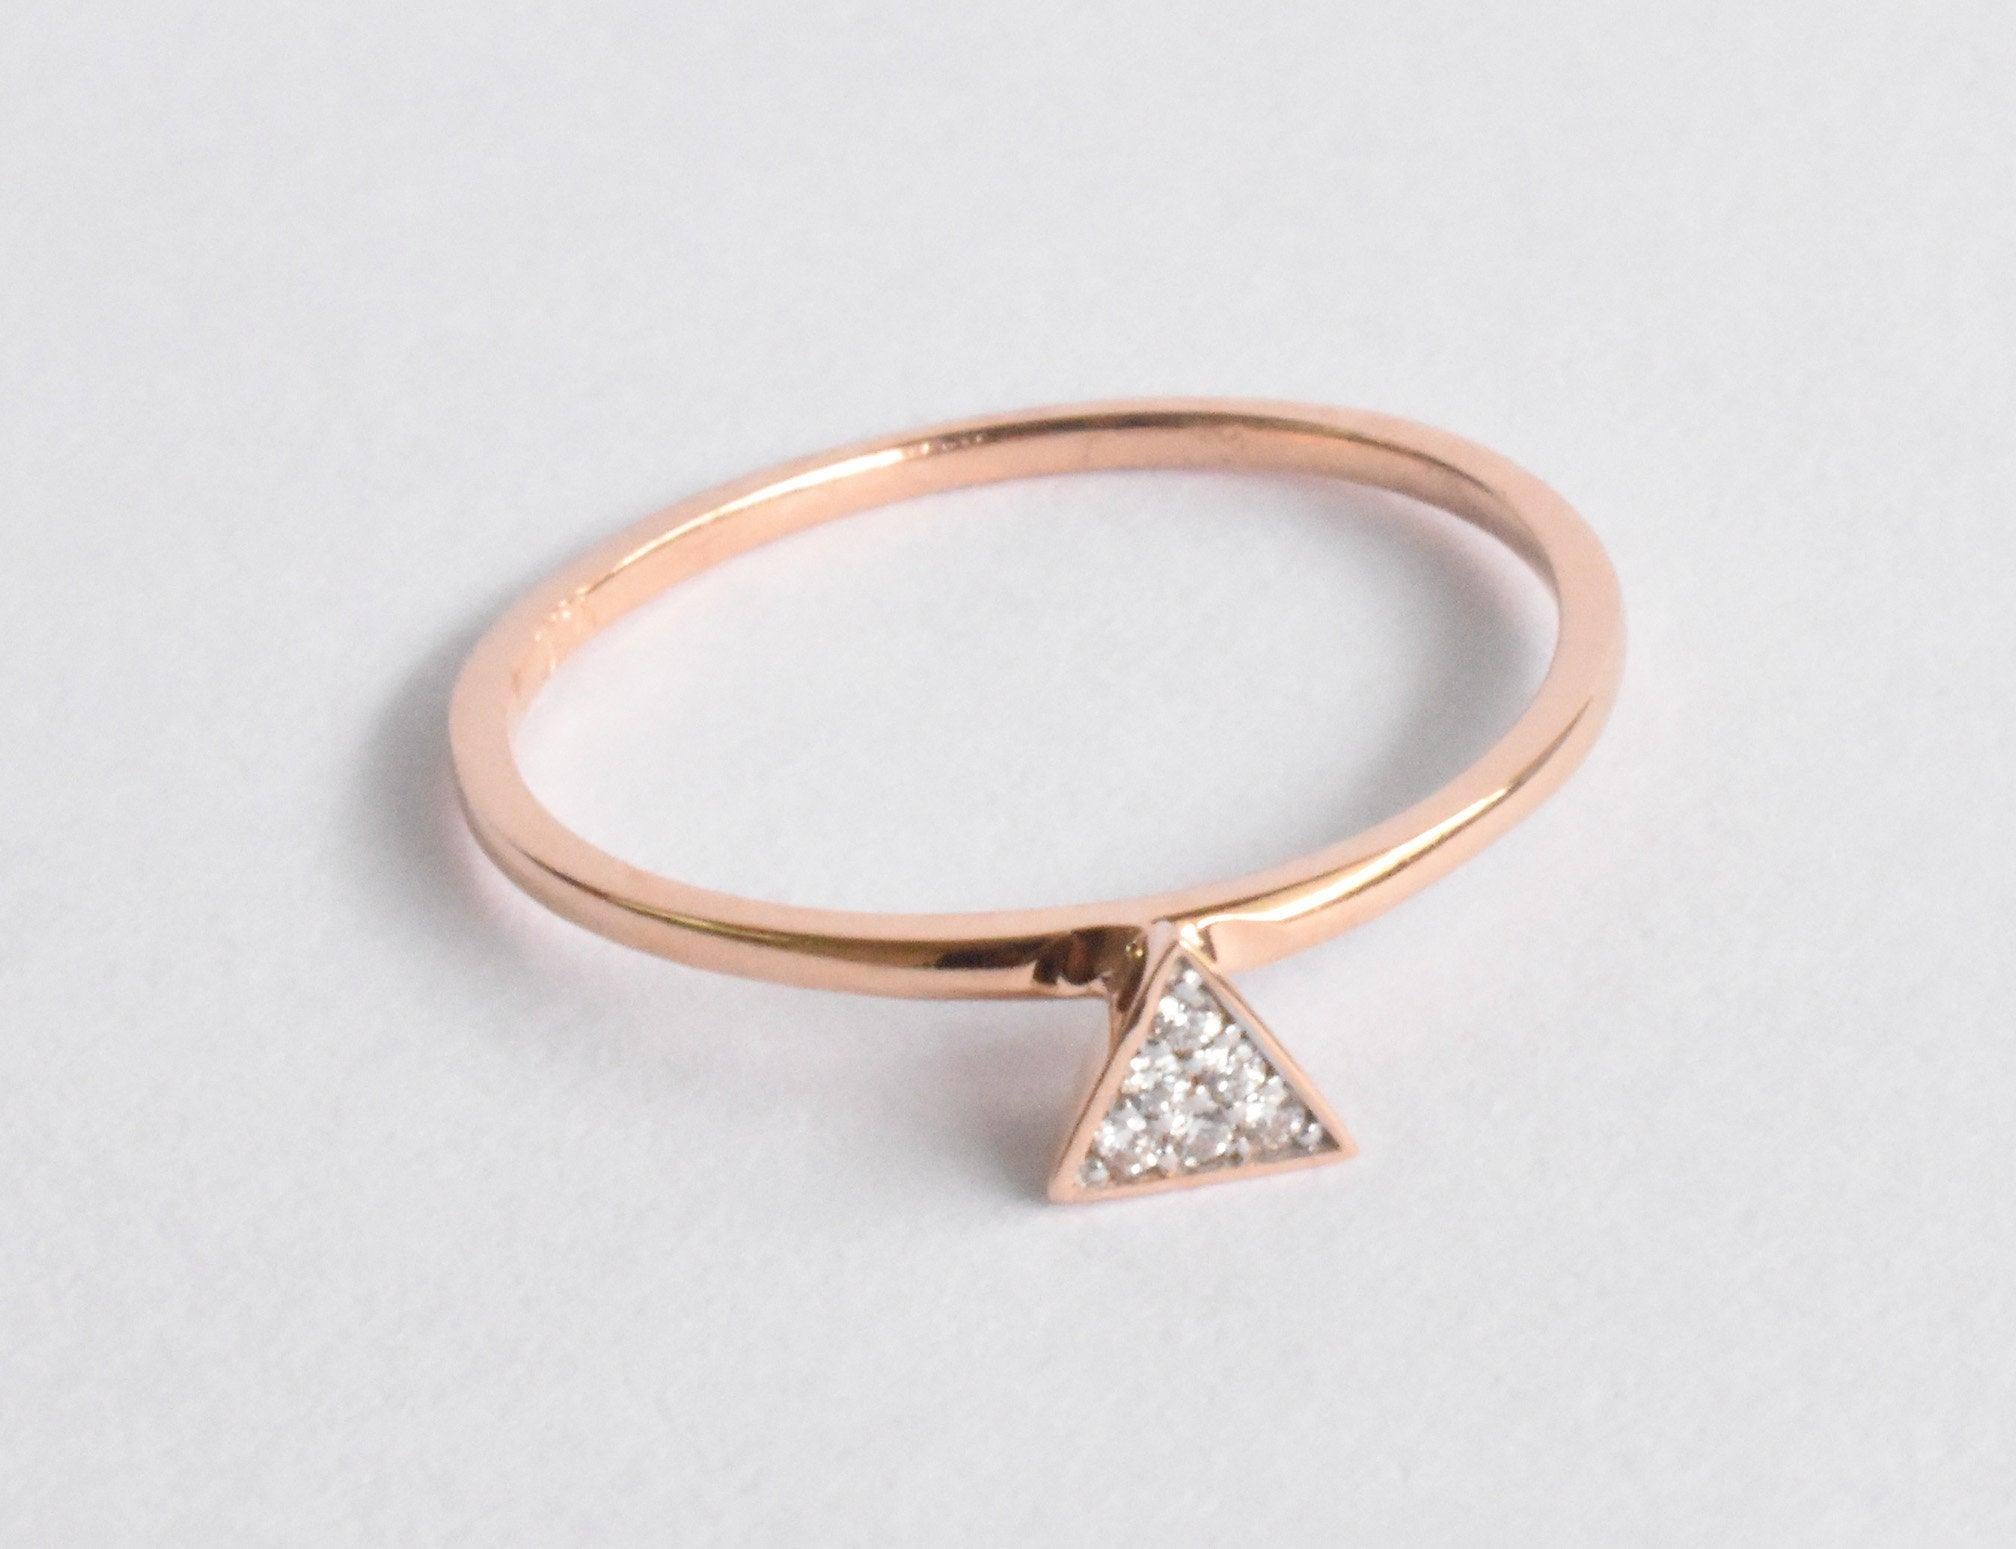 For Sale:  18k Gold Triangle Stacking Ring with White Pave Diamonds Minimalist Ring 2